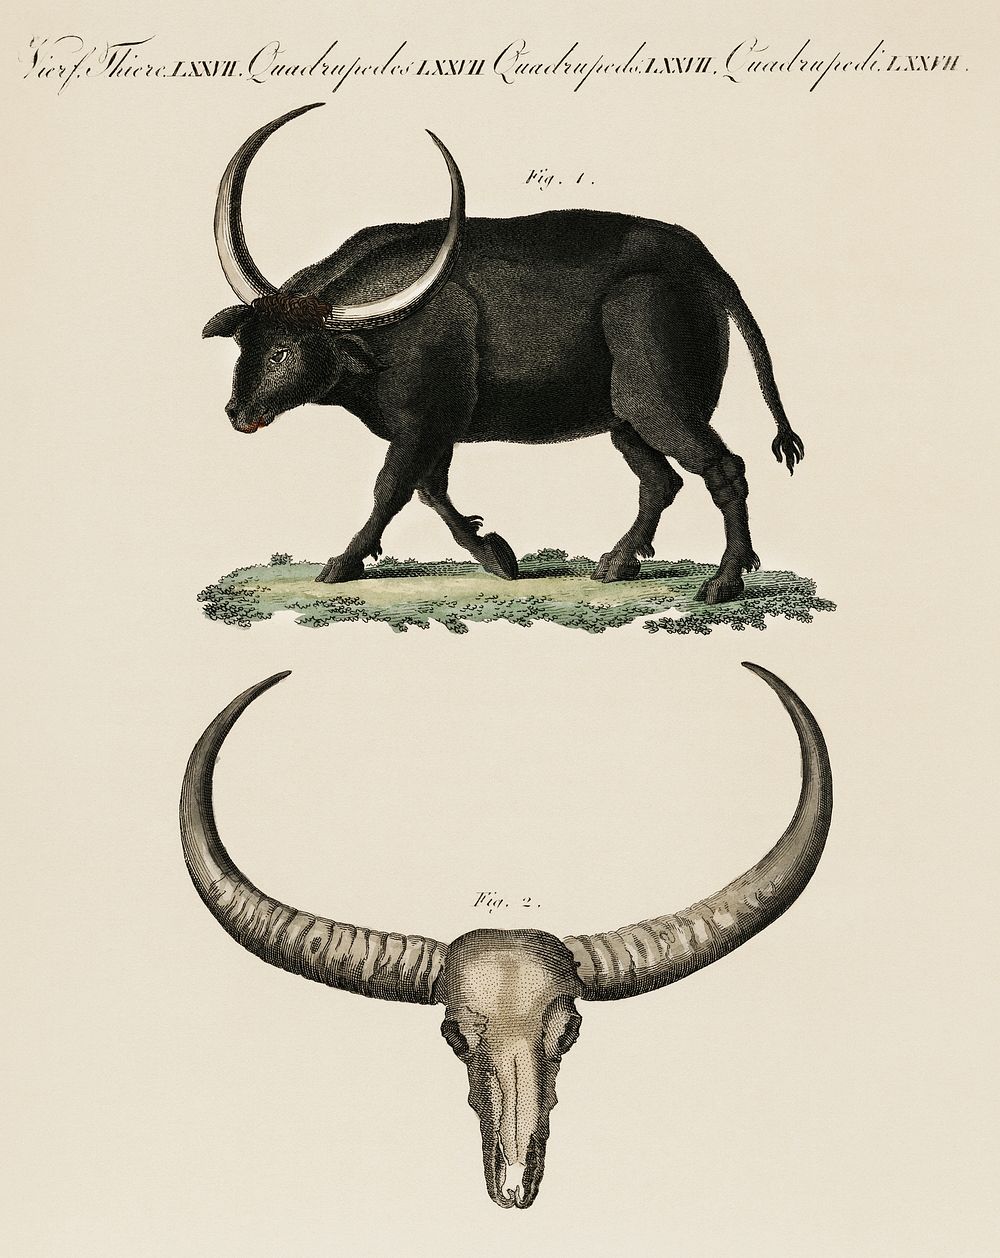 Bilderbuch fur Kinder by Georg Melchior Kraus, published in 1790-1830, an illustration of long horned buffalo and skull.…